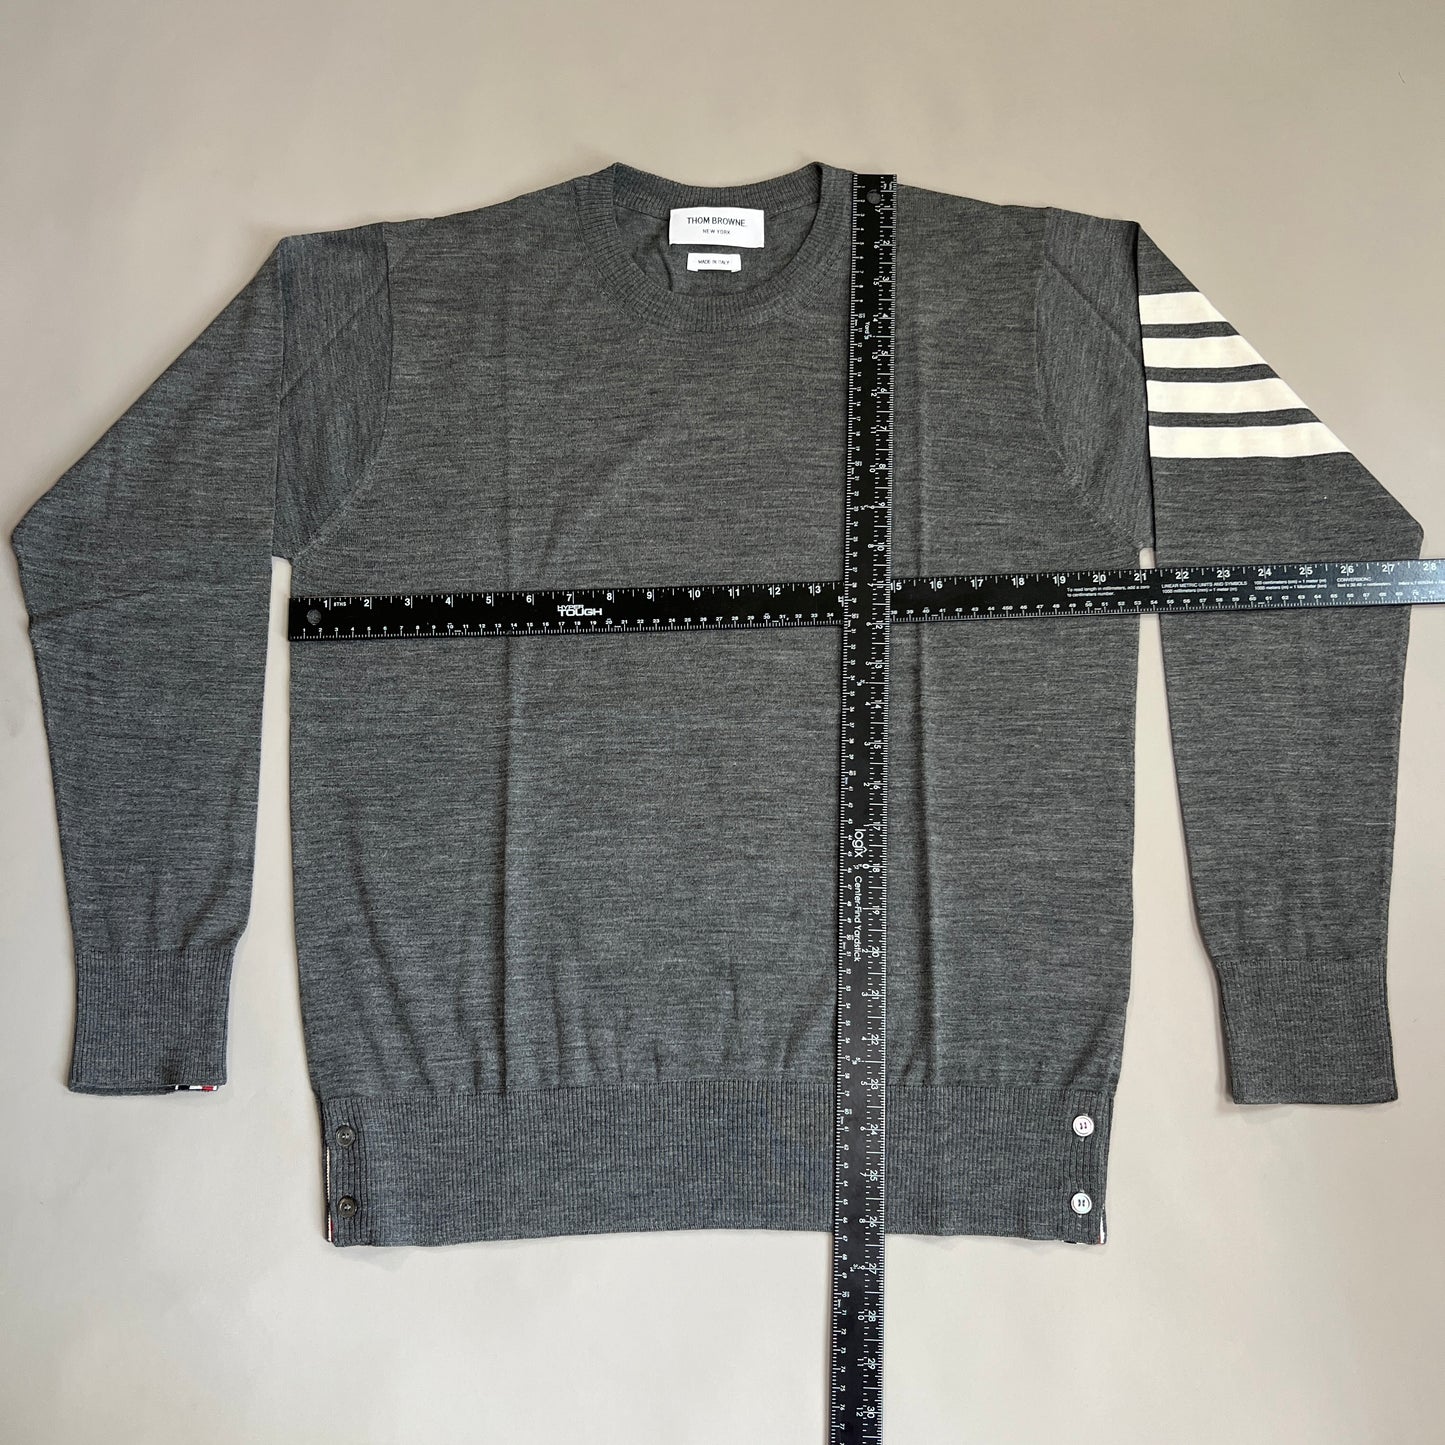 THOM BROWNE New York Classic Crewneck Pullover w/4 Bar Sleeve in Sustainable Fine Merino Wool Med Grey Size 4 (New)